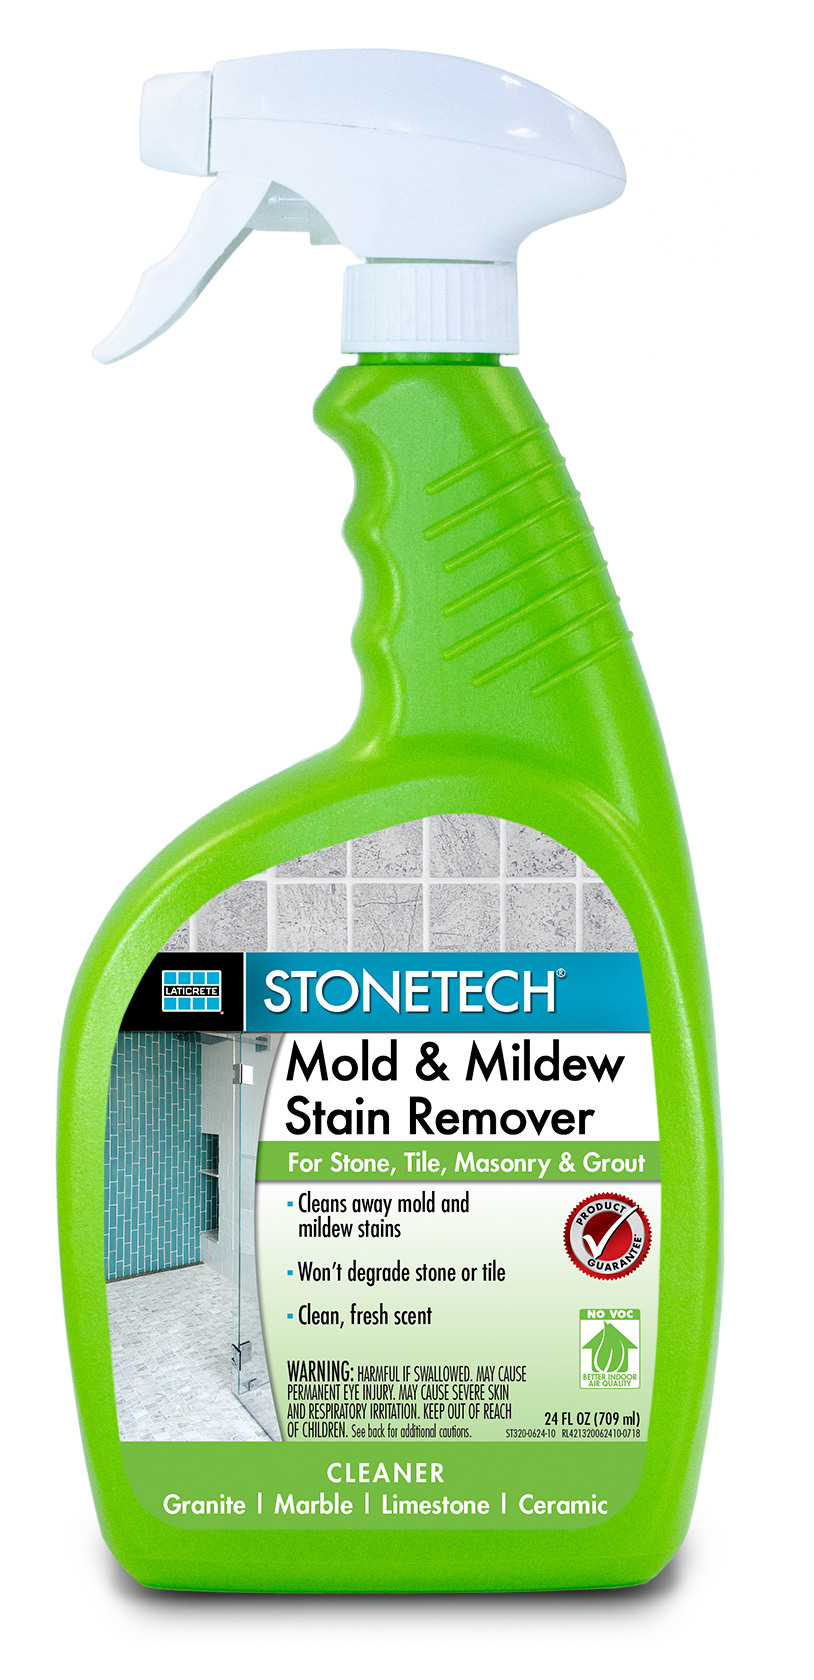 STONETECH® Mold & Mildew Stain Remover